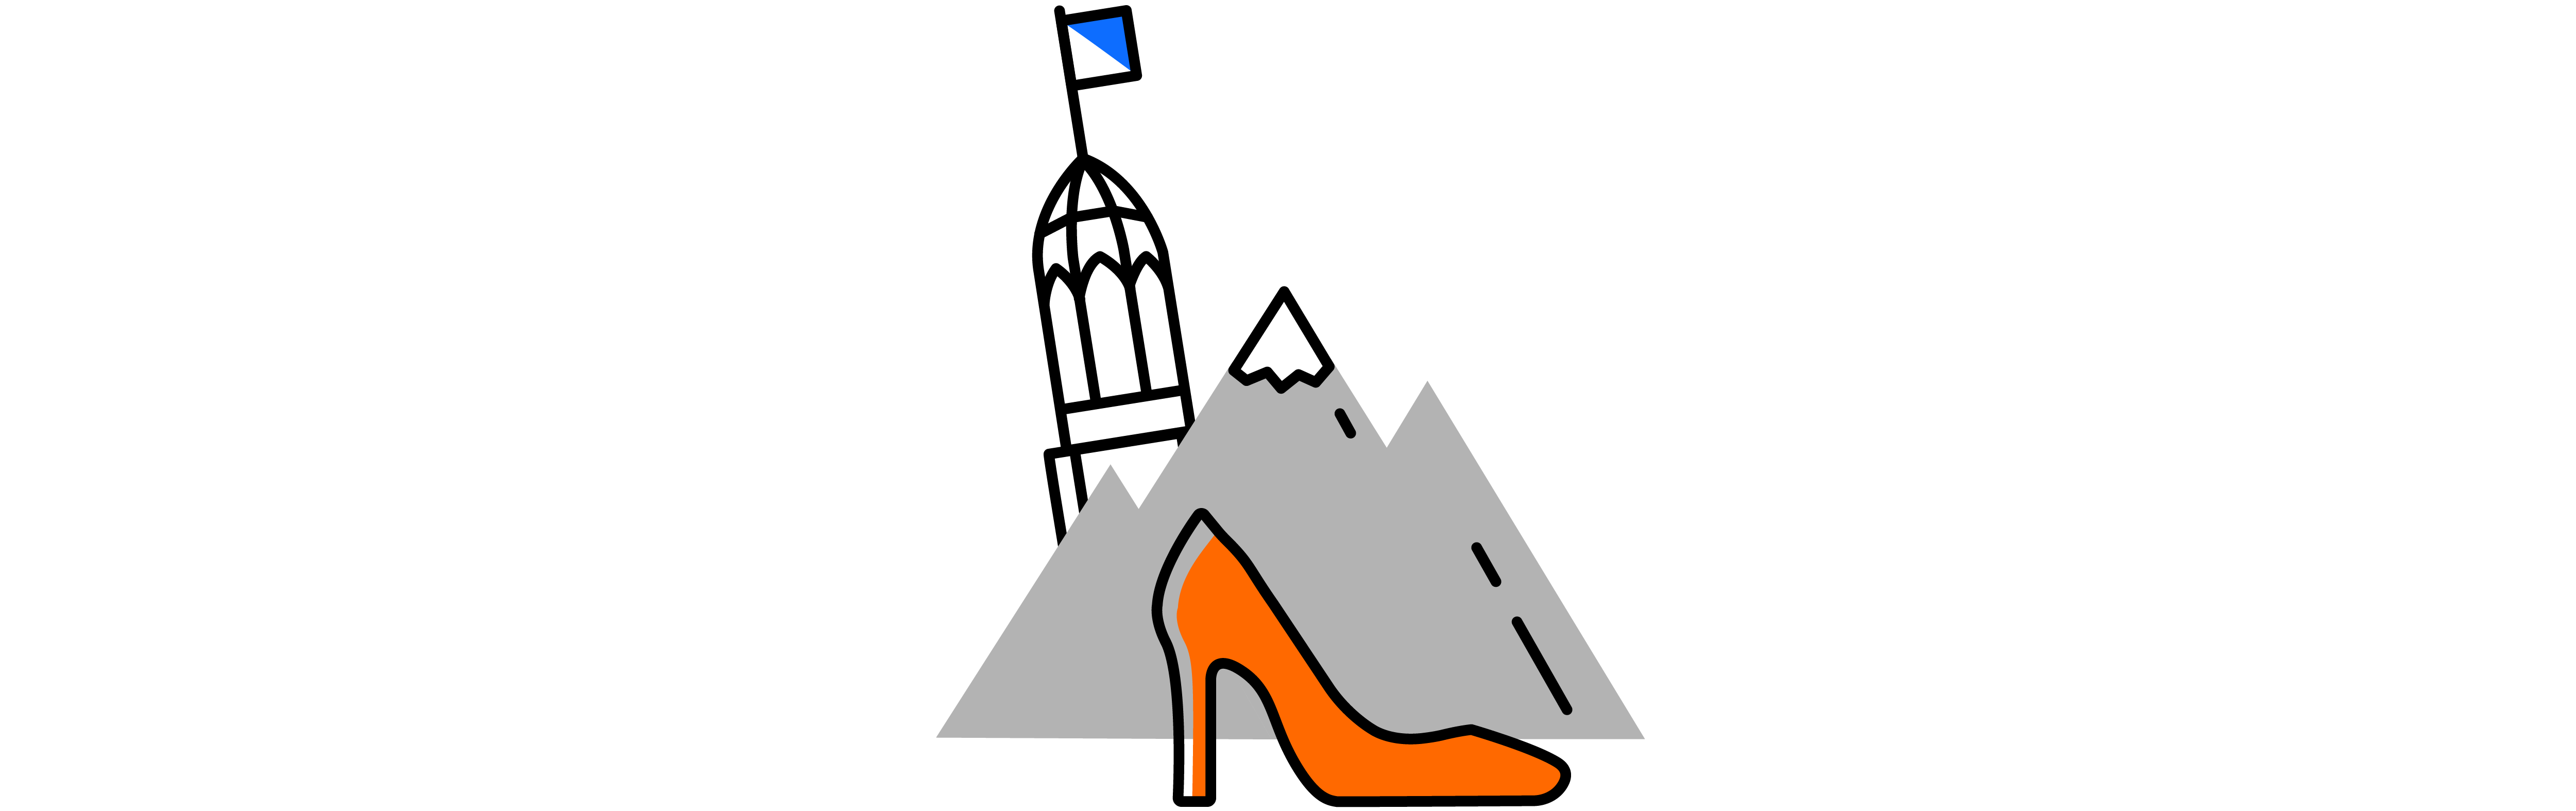 A heel shoe in front of a mountain and a leaning tower